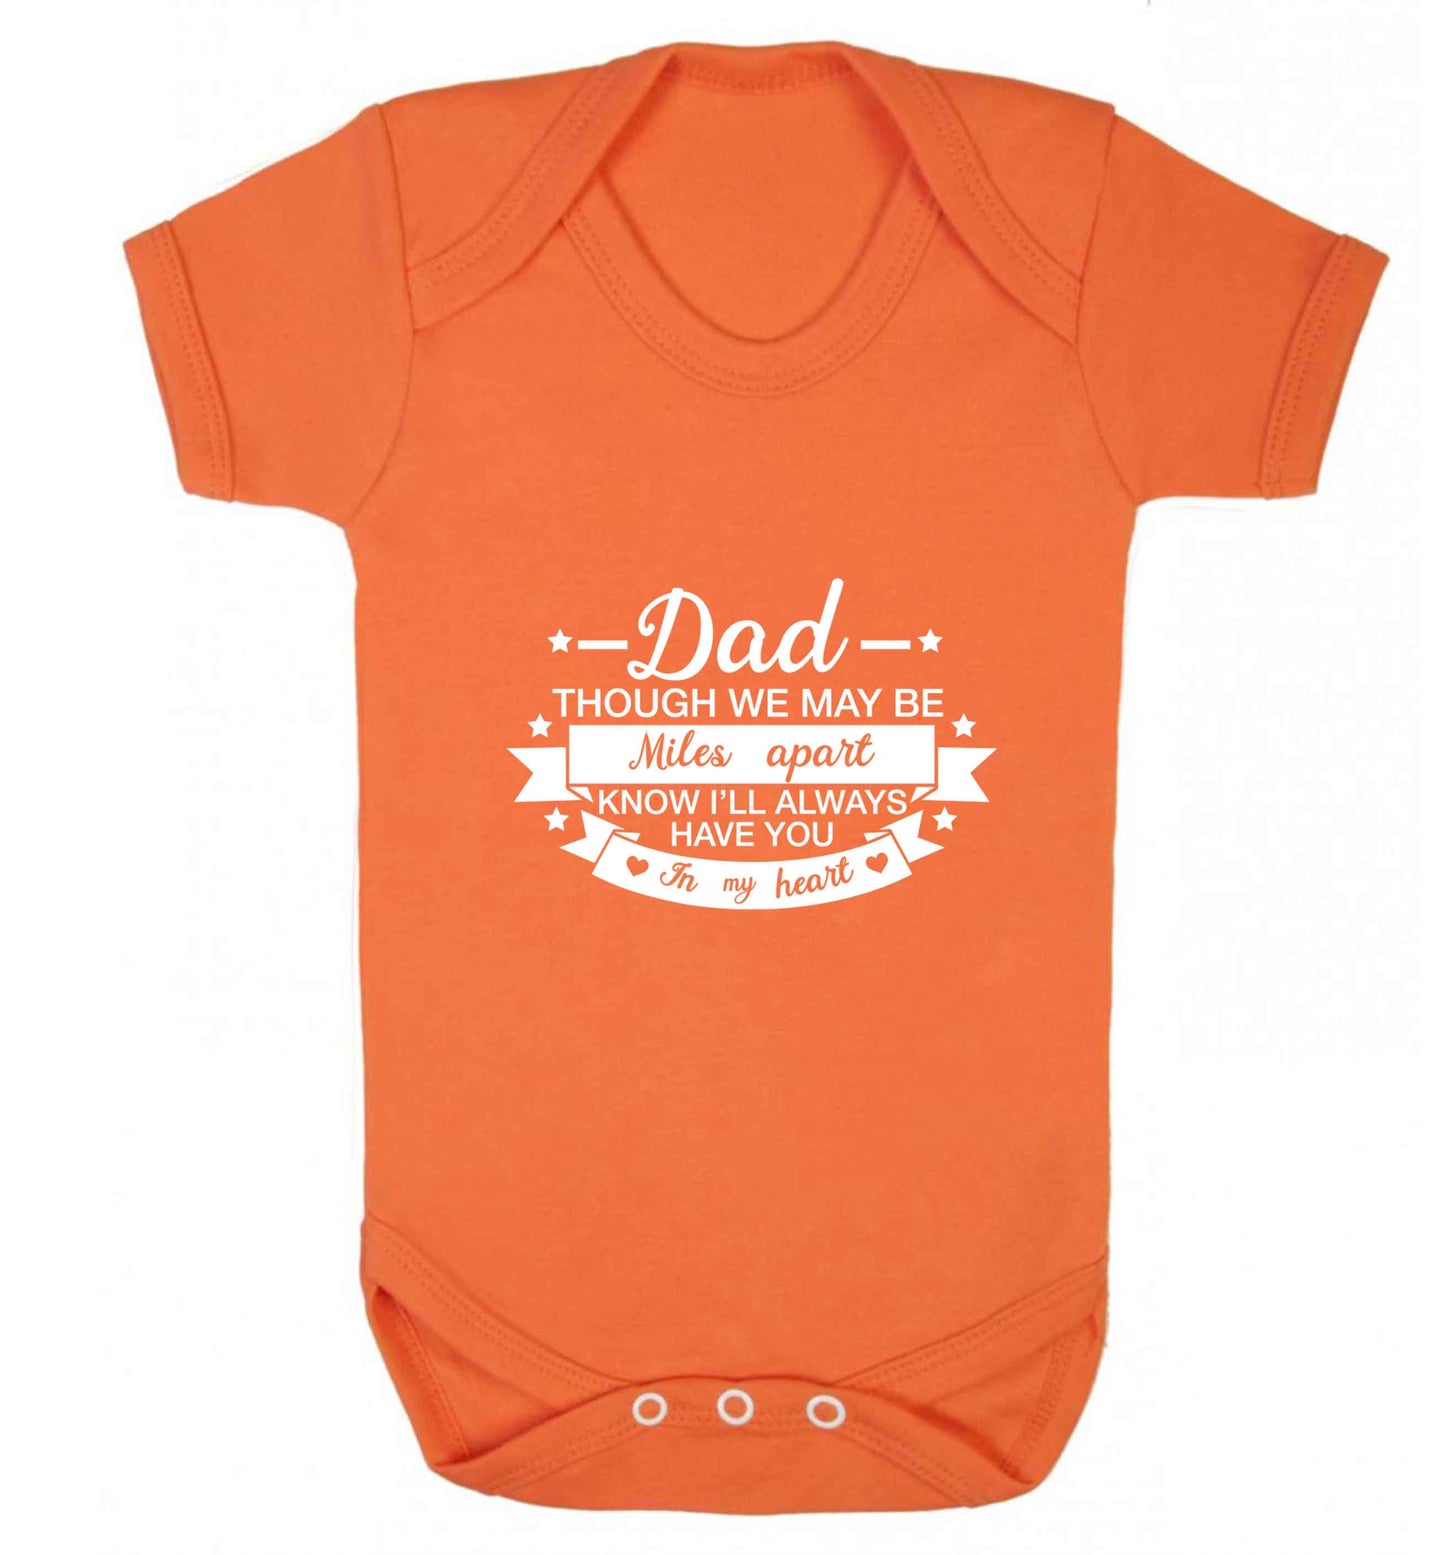 Dad though we are miles apart know I'll always have you in my heart baby vest orange 18-24 months